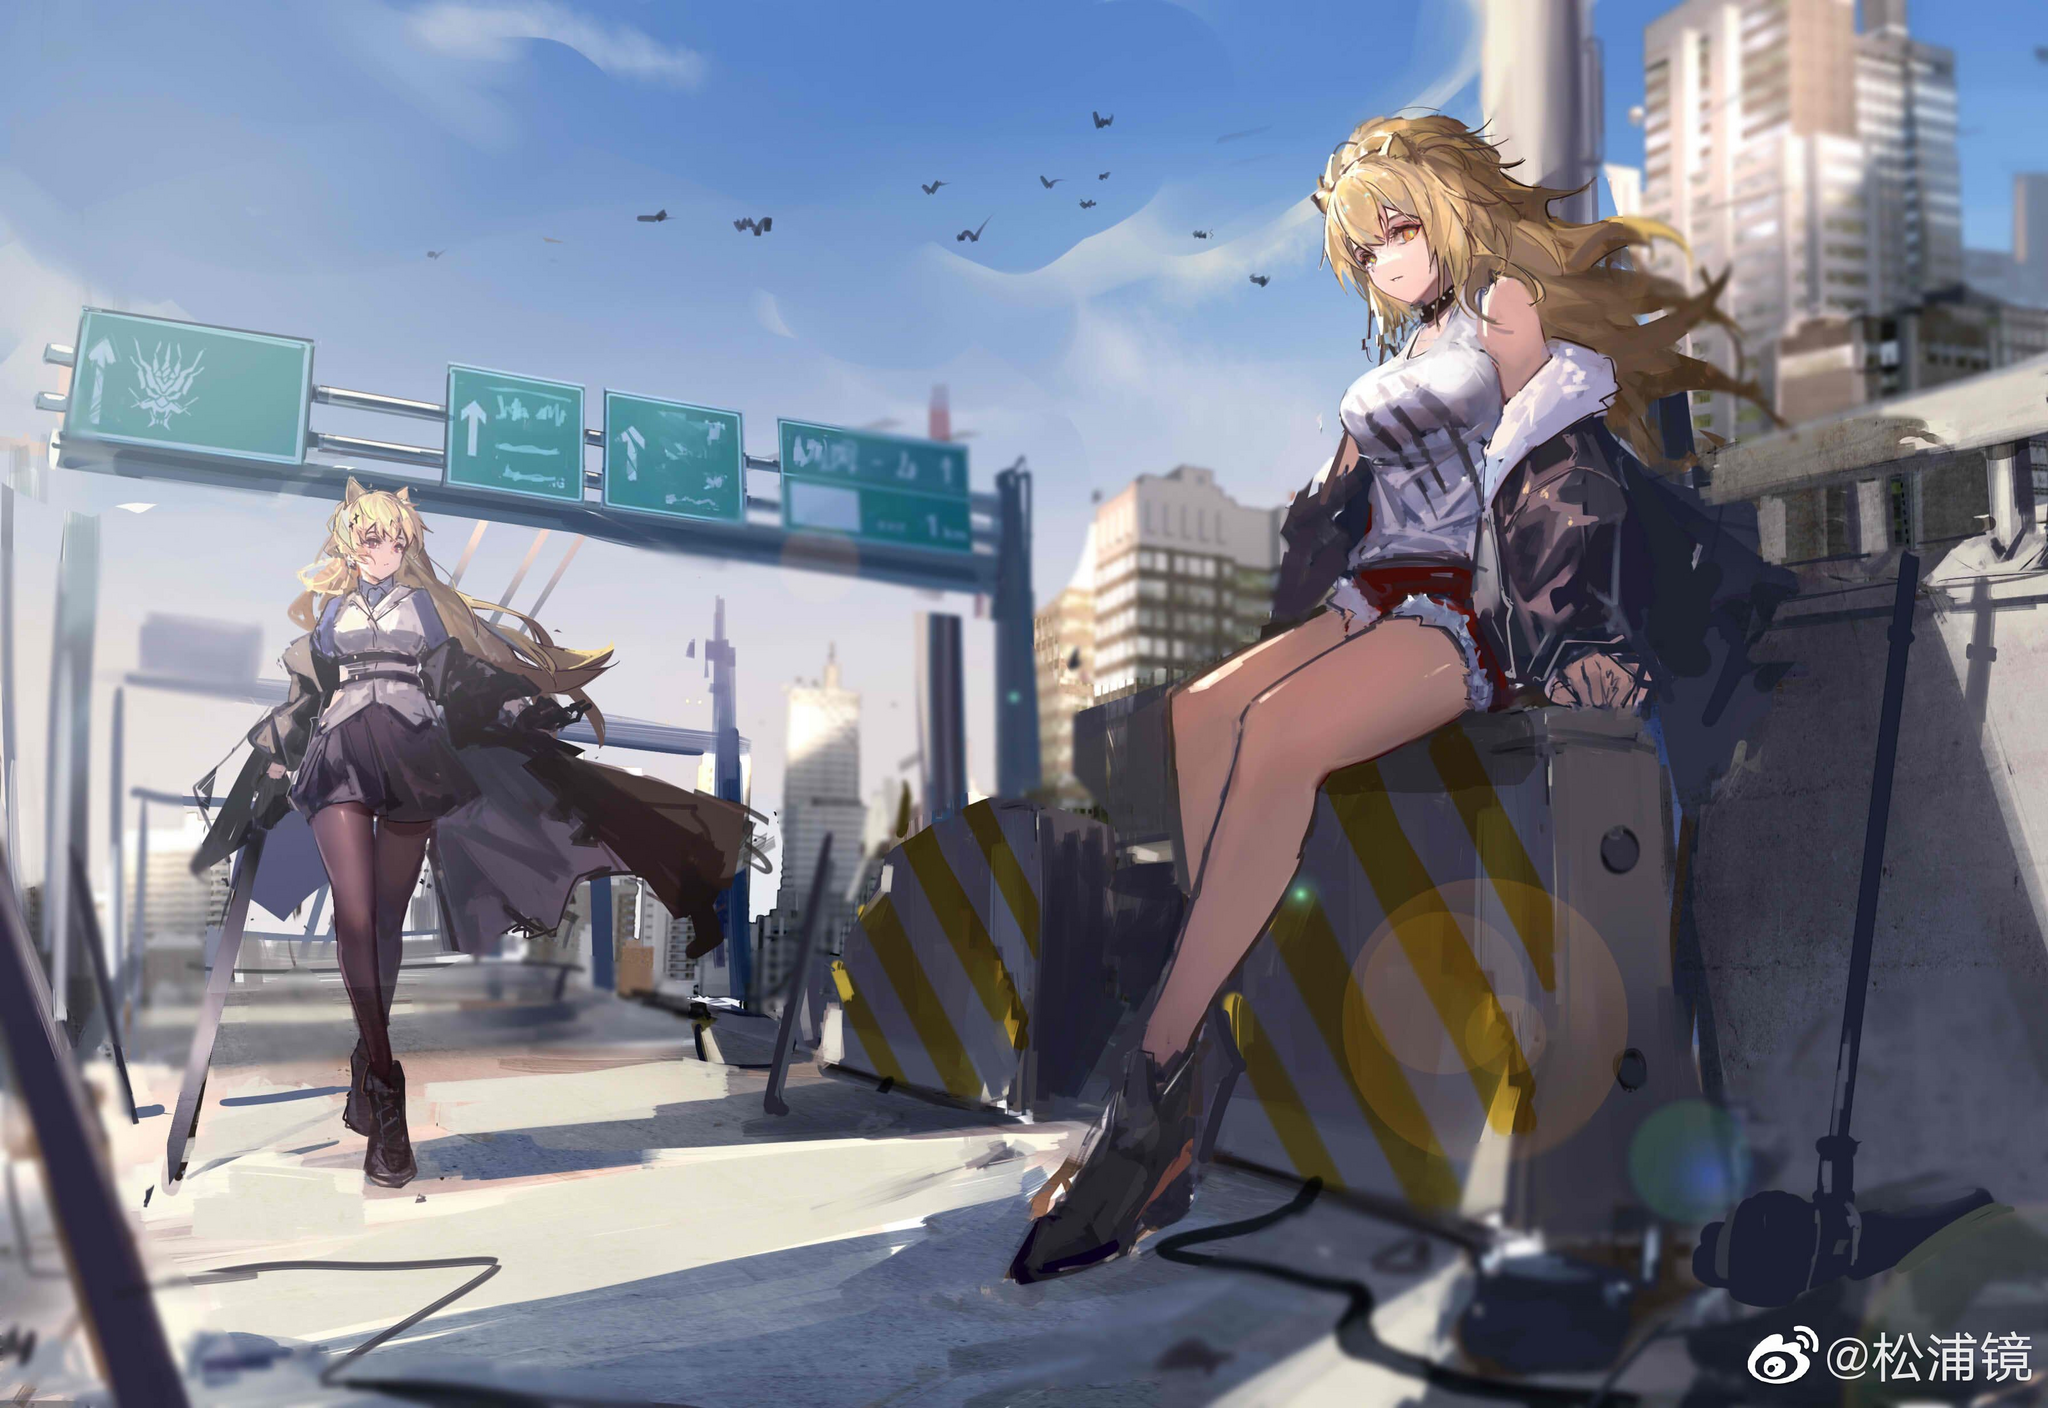 Arknights operators - Anime, Anime art, Arknights, W (Arknights), Gladia, Feater, Siege (Arknights), Talulah, Specter the Unchained, Ines, Ambriel, Texas (Arknights), Exusiai, Saria, Longpost